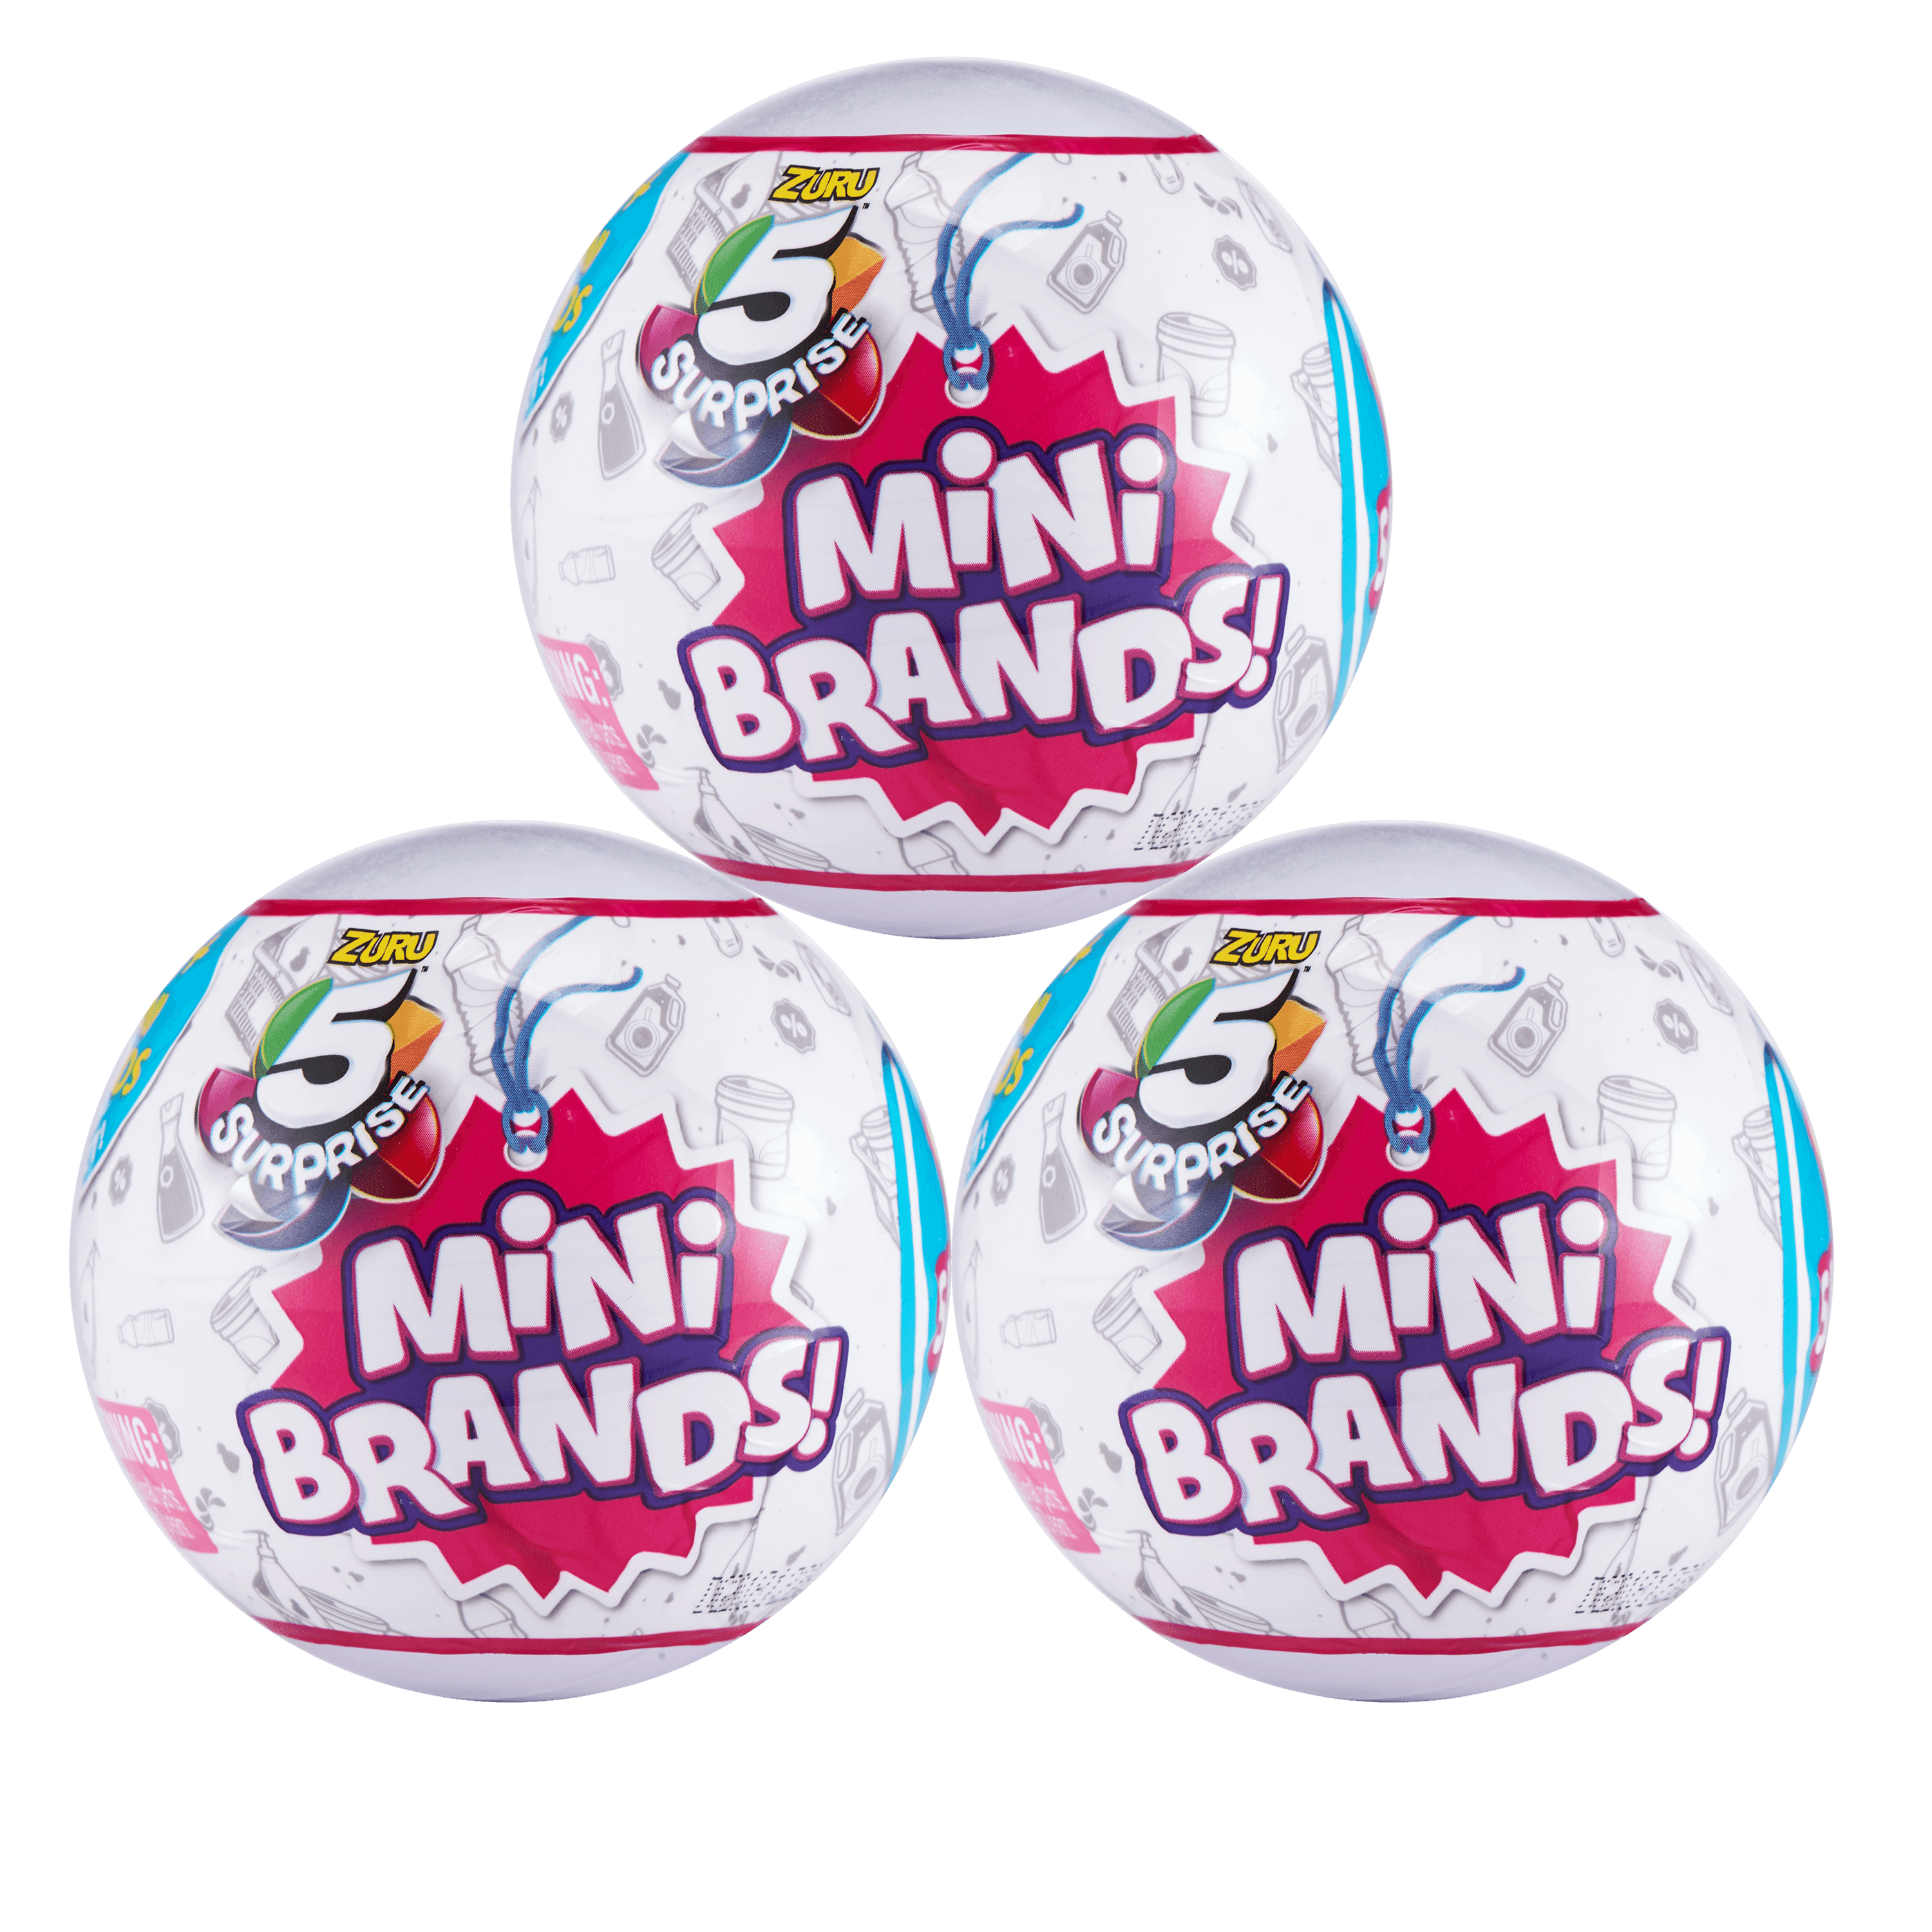 Details about   5 Surprise Mini Brands Mystery Capsule Collectible Toy by ZURU 8 Balls Lot of 4